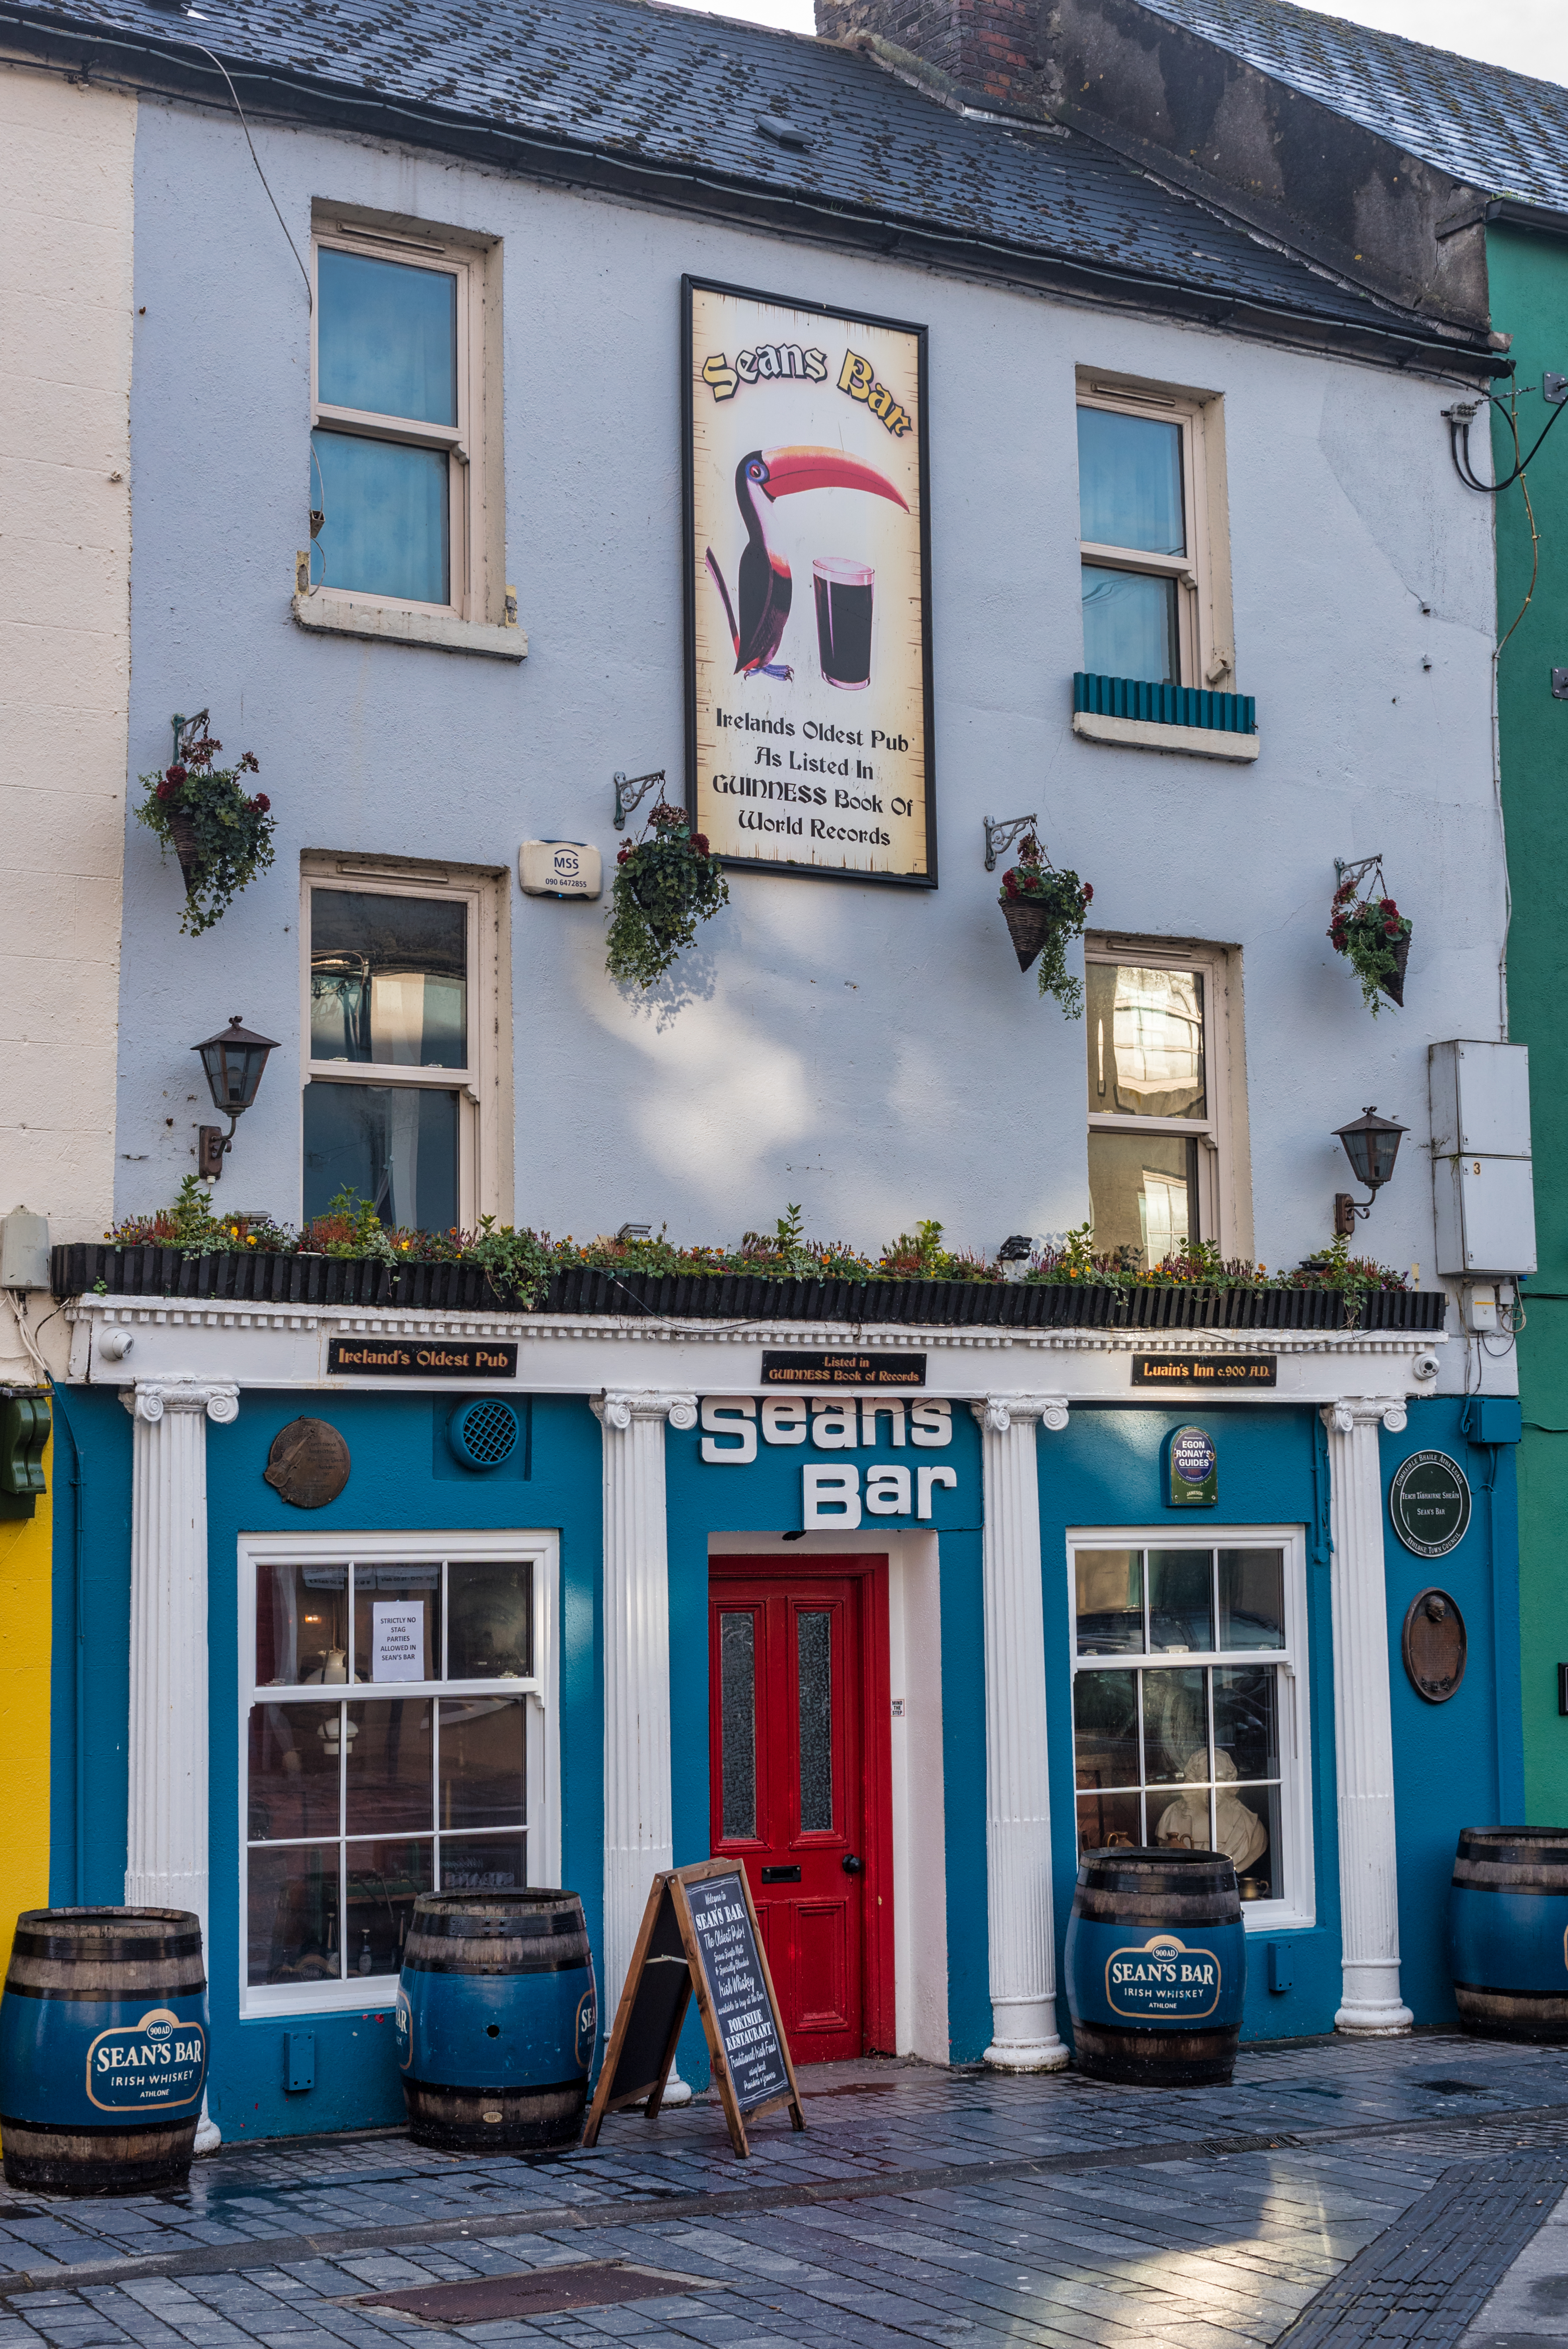 Best Things to Do in Ireland - Sean's Bar - Oldest Pub in Ireland